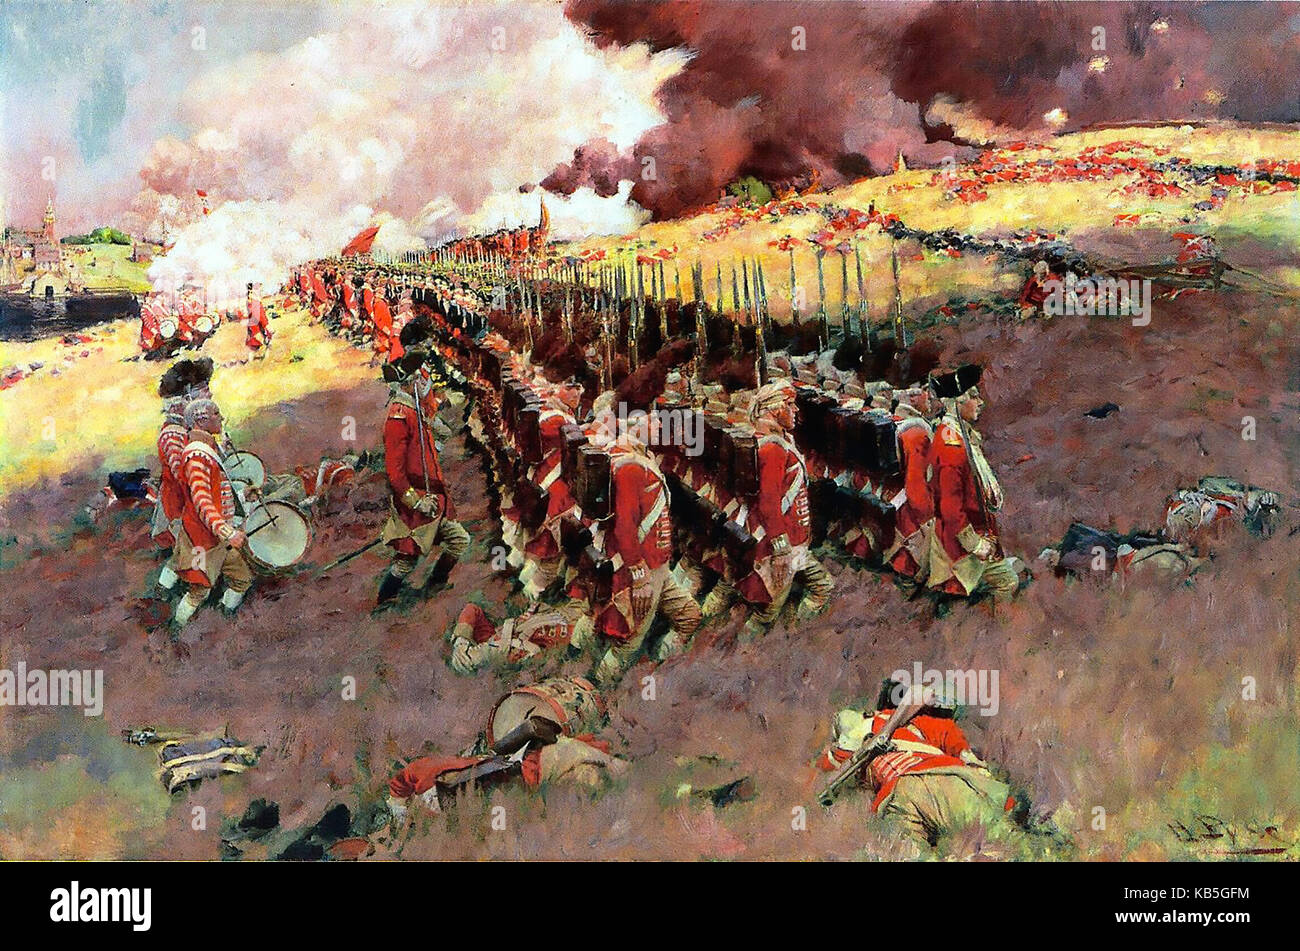 HOWARD PYLE (1853-1911) American illustrator. Battle of Bunker Hill painted in 1897 showing the second British attempt to take Breed's Hill Stock Photo